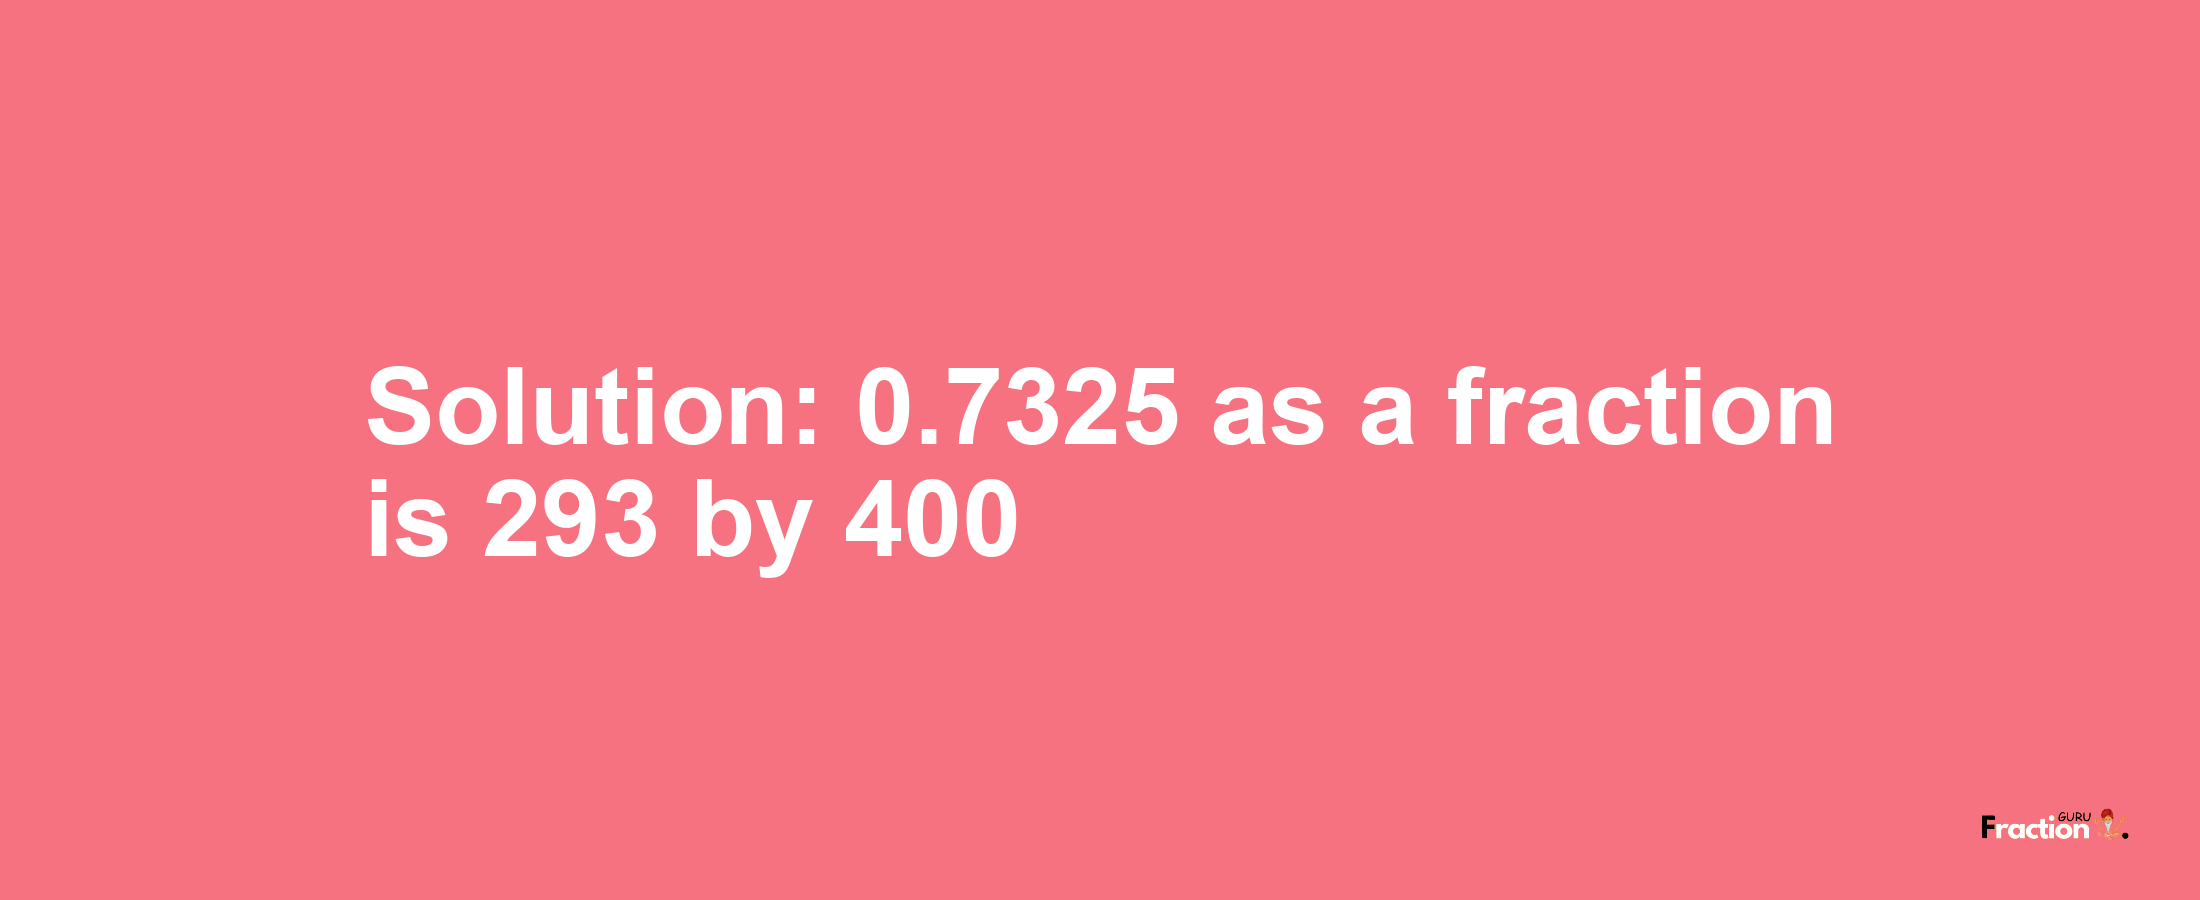 Solution:0.7325 as a fraction is 293/400